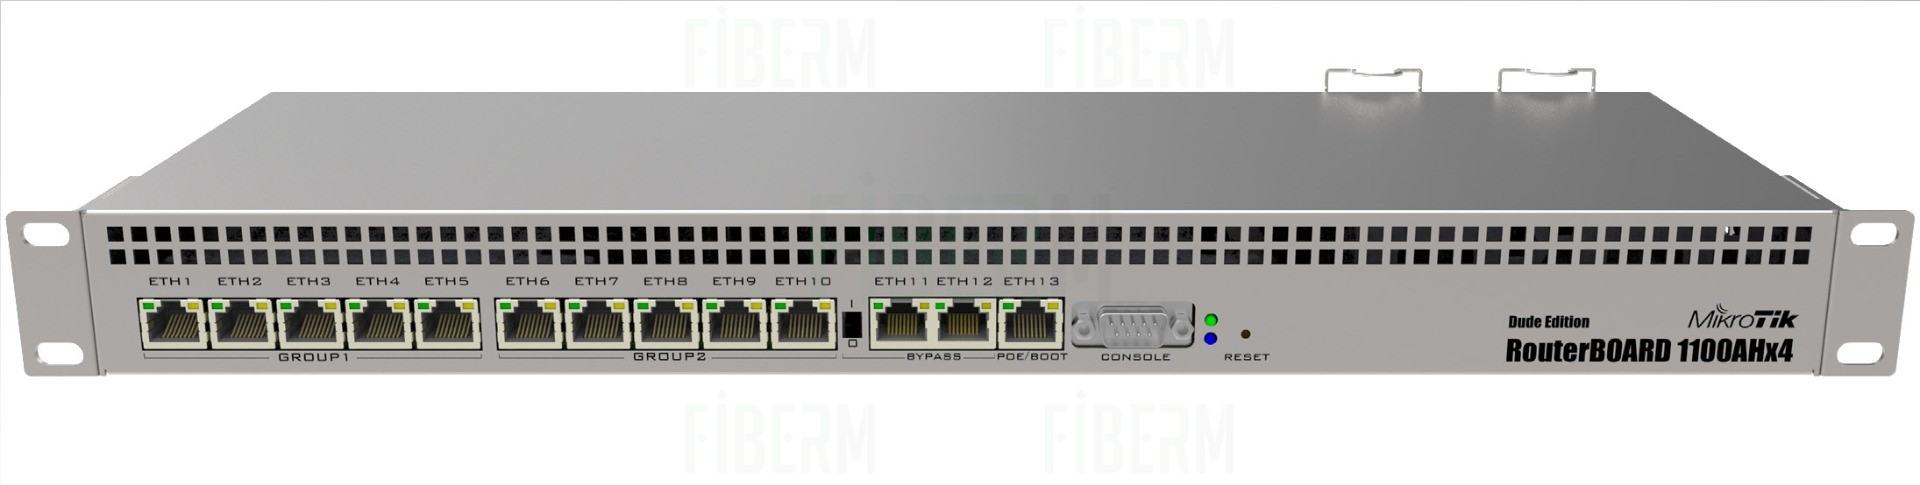 Mikrotik RouterBoard RB1100AHx4 Dude Edition